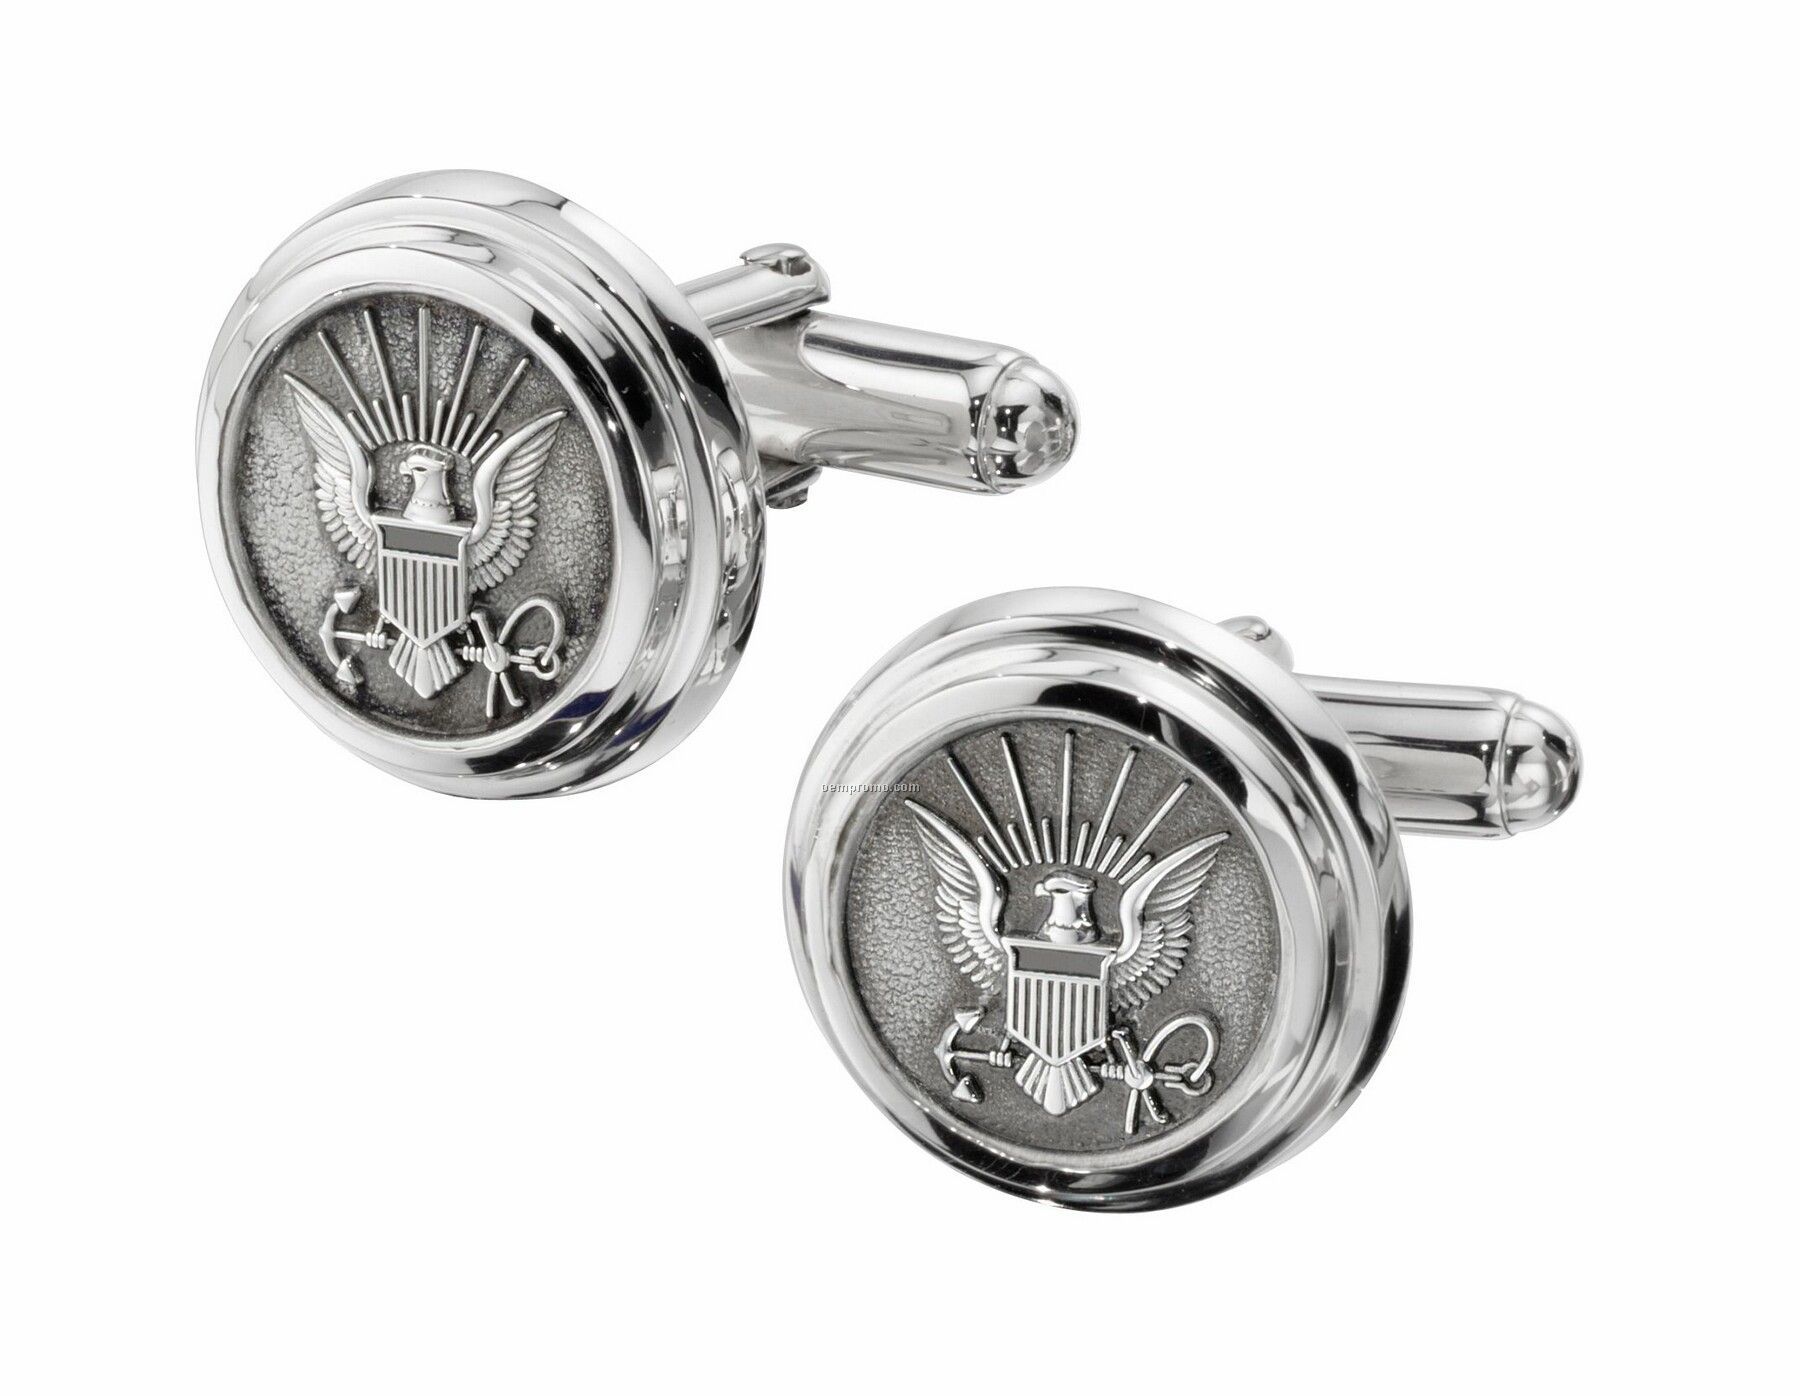 Ovations - Tribute Sterling Silver Cuff Links With Sterling Silver Insert